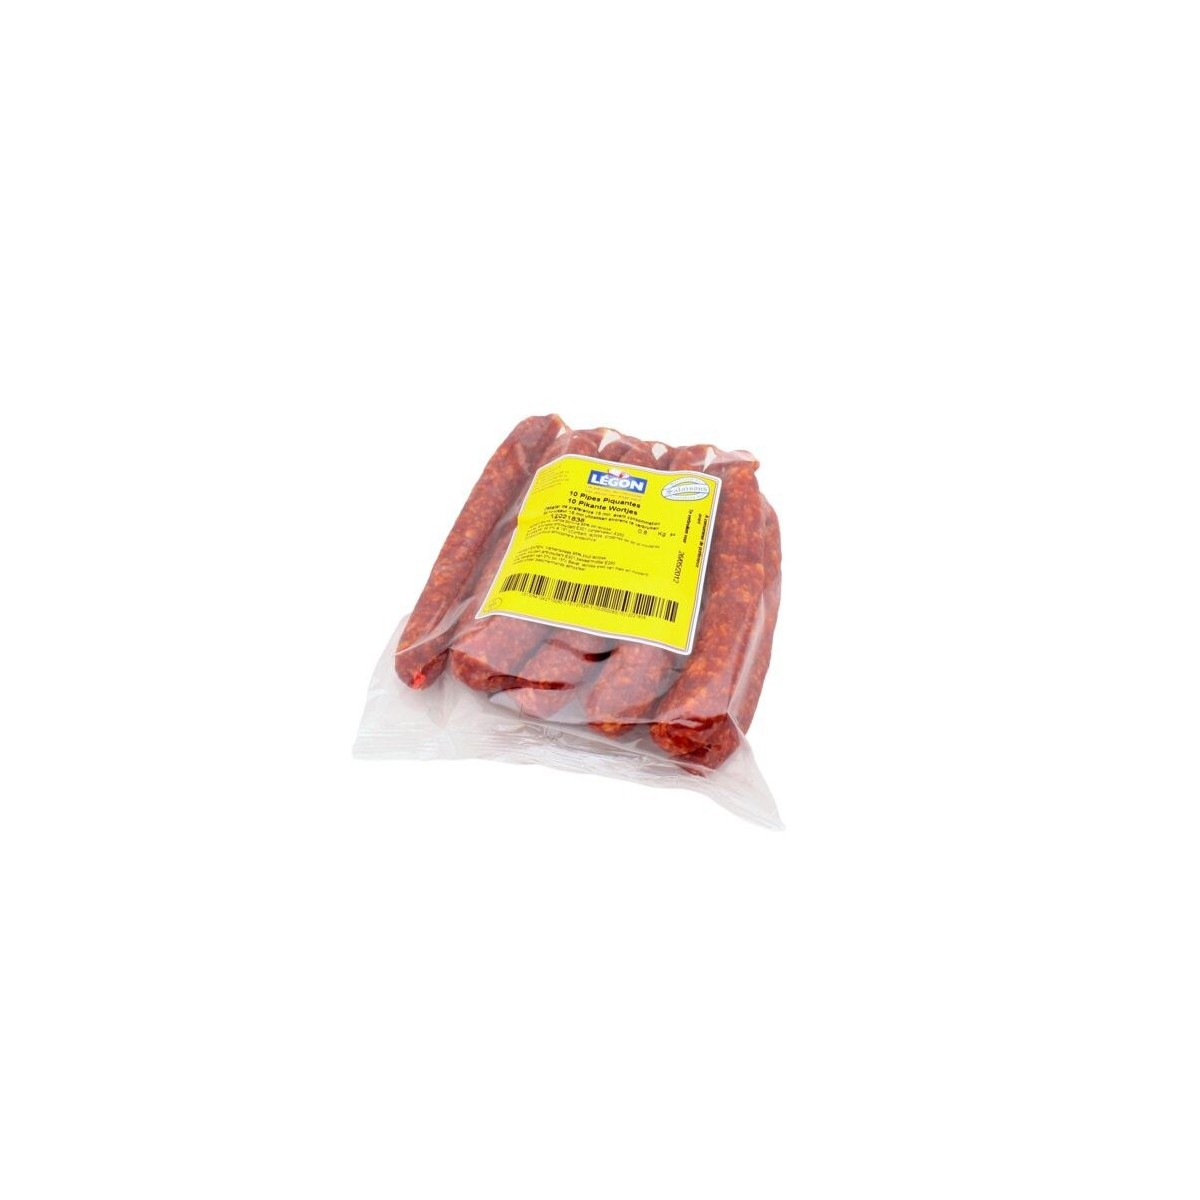 SPICY DRY SAUSAGE ARDENNE LEGON 10 X 80GR  READY TO BAKEKAGE